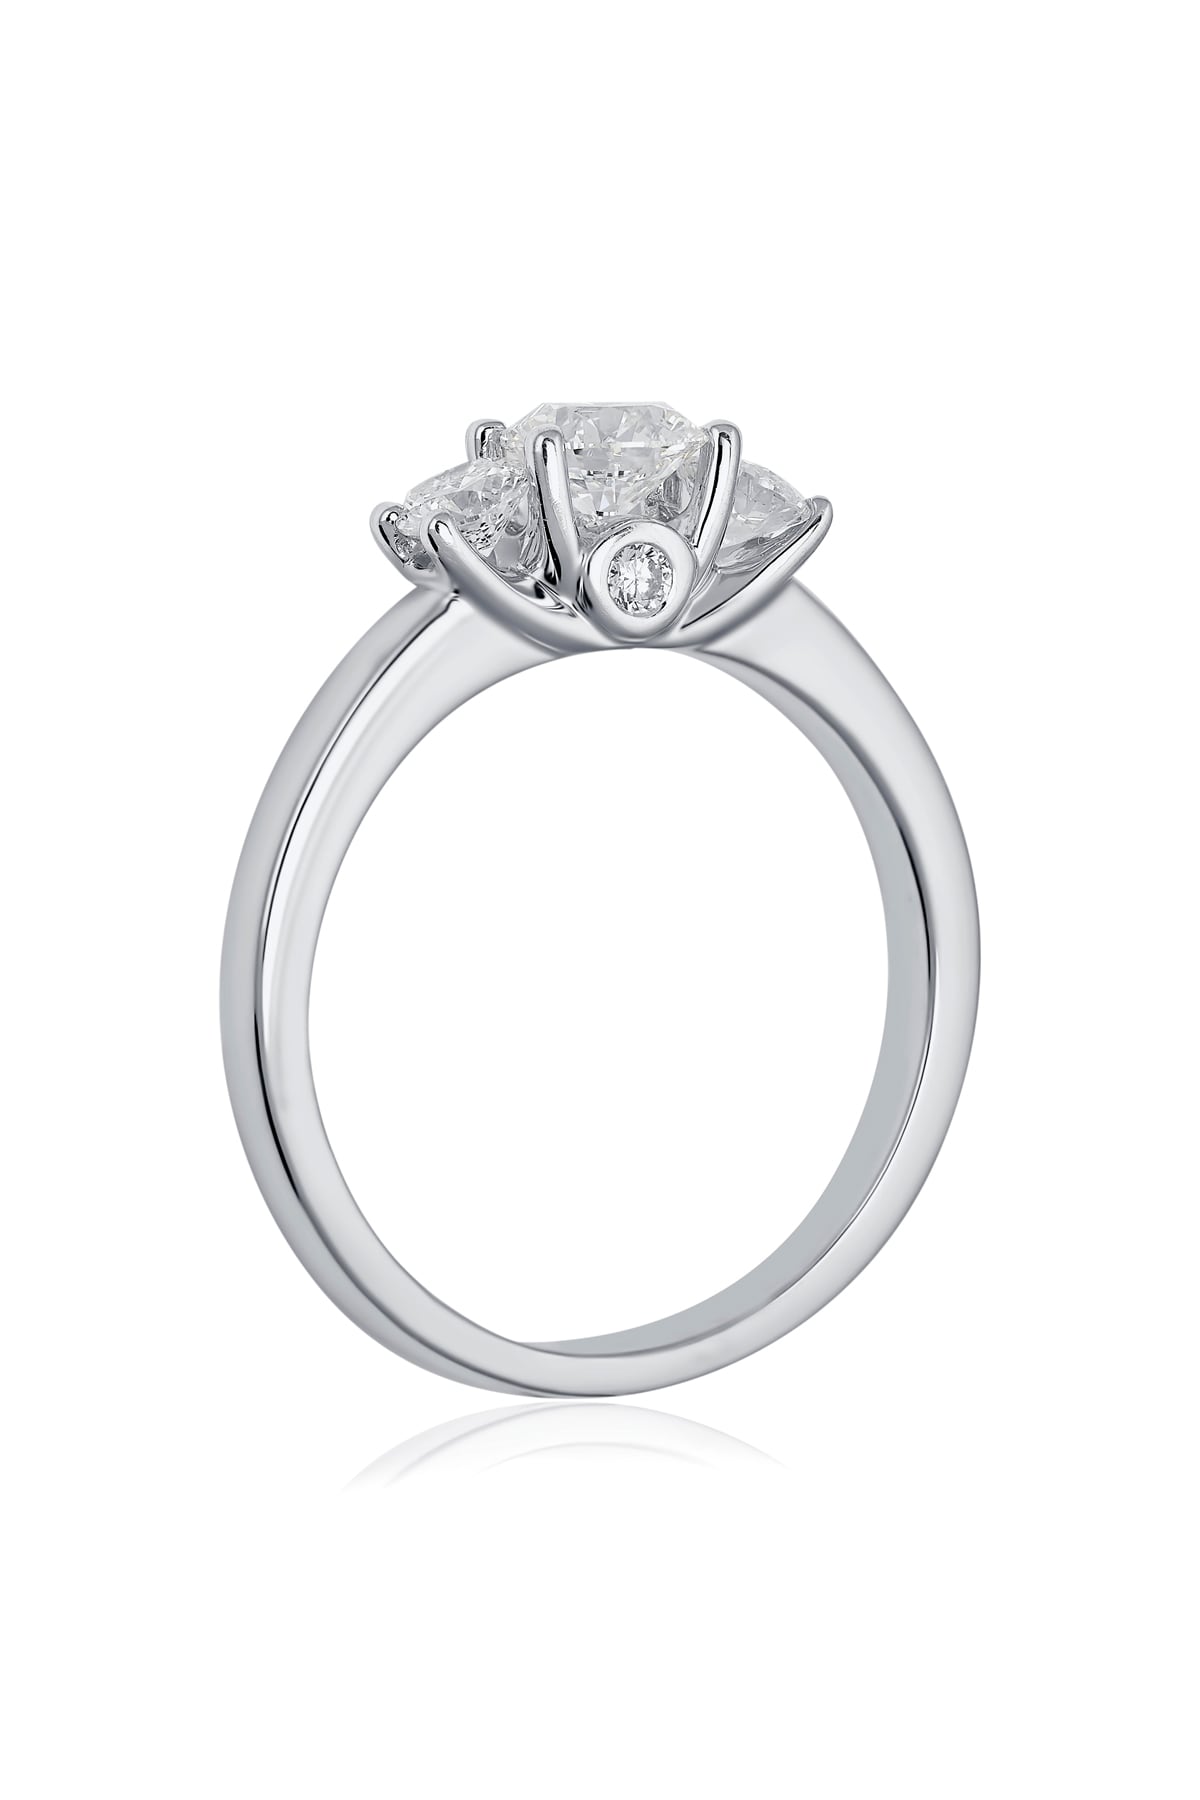 Three Stone Diamond Engagement Ring in White Gold from LeGassick Jewellery Gold Coast.